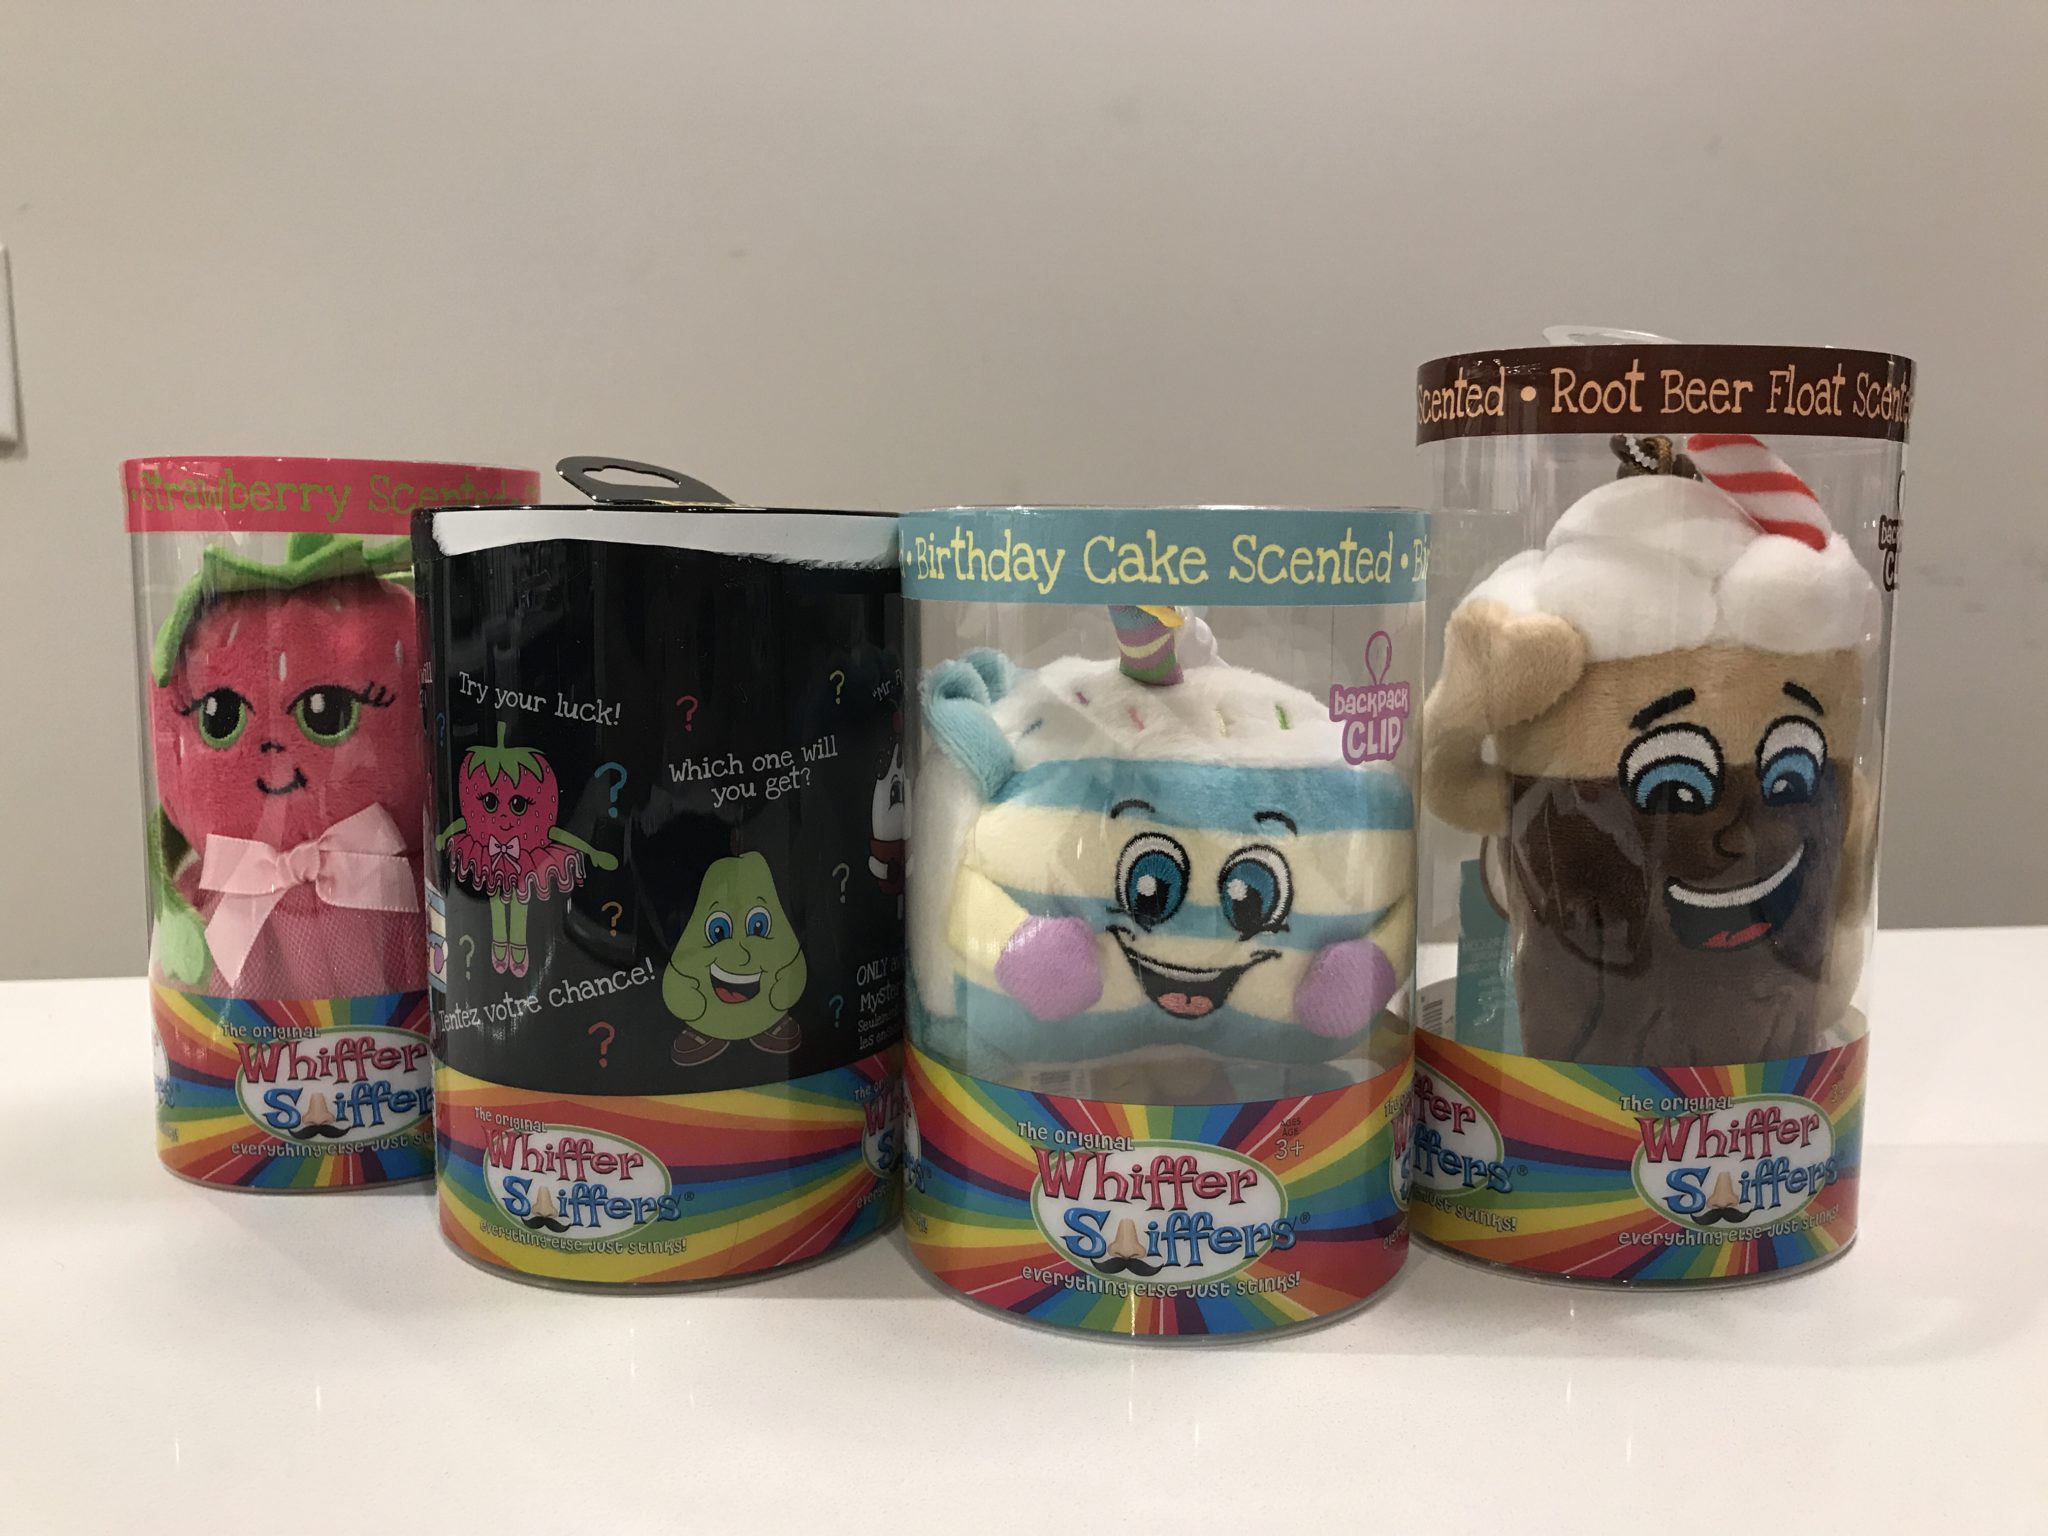 Whiffer Sniffers - Adding Fragrance to Fun